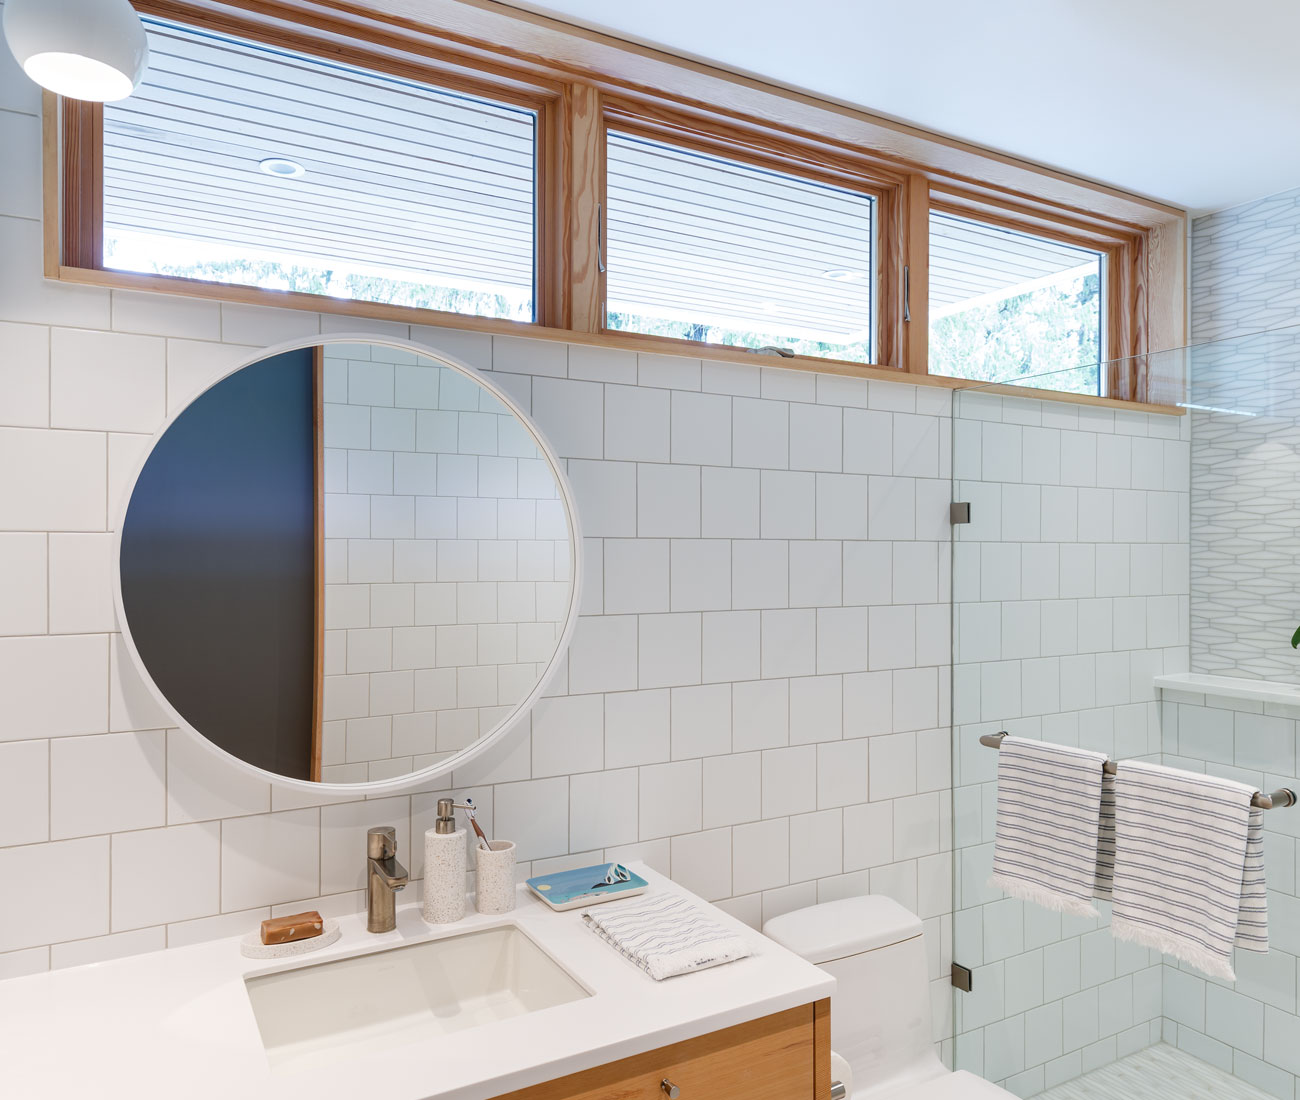 A round mirror contrasts with the linear details in the bathroom. 